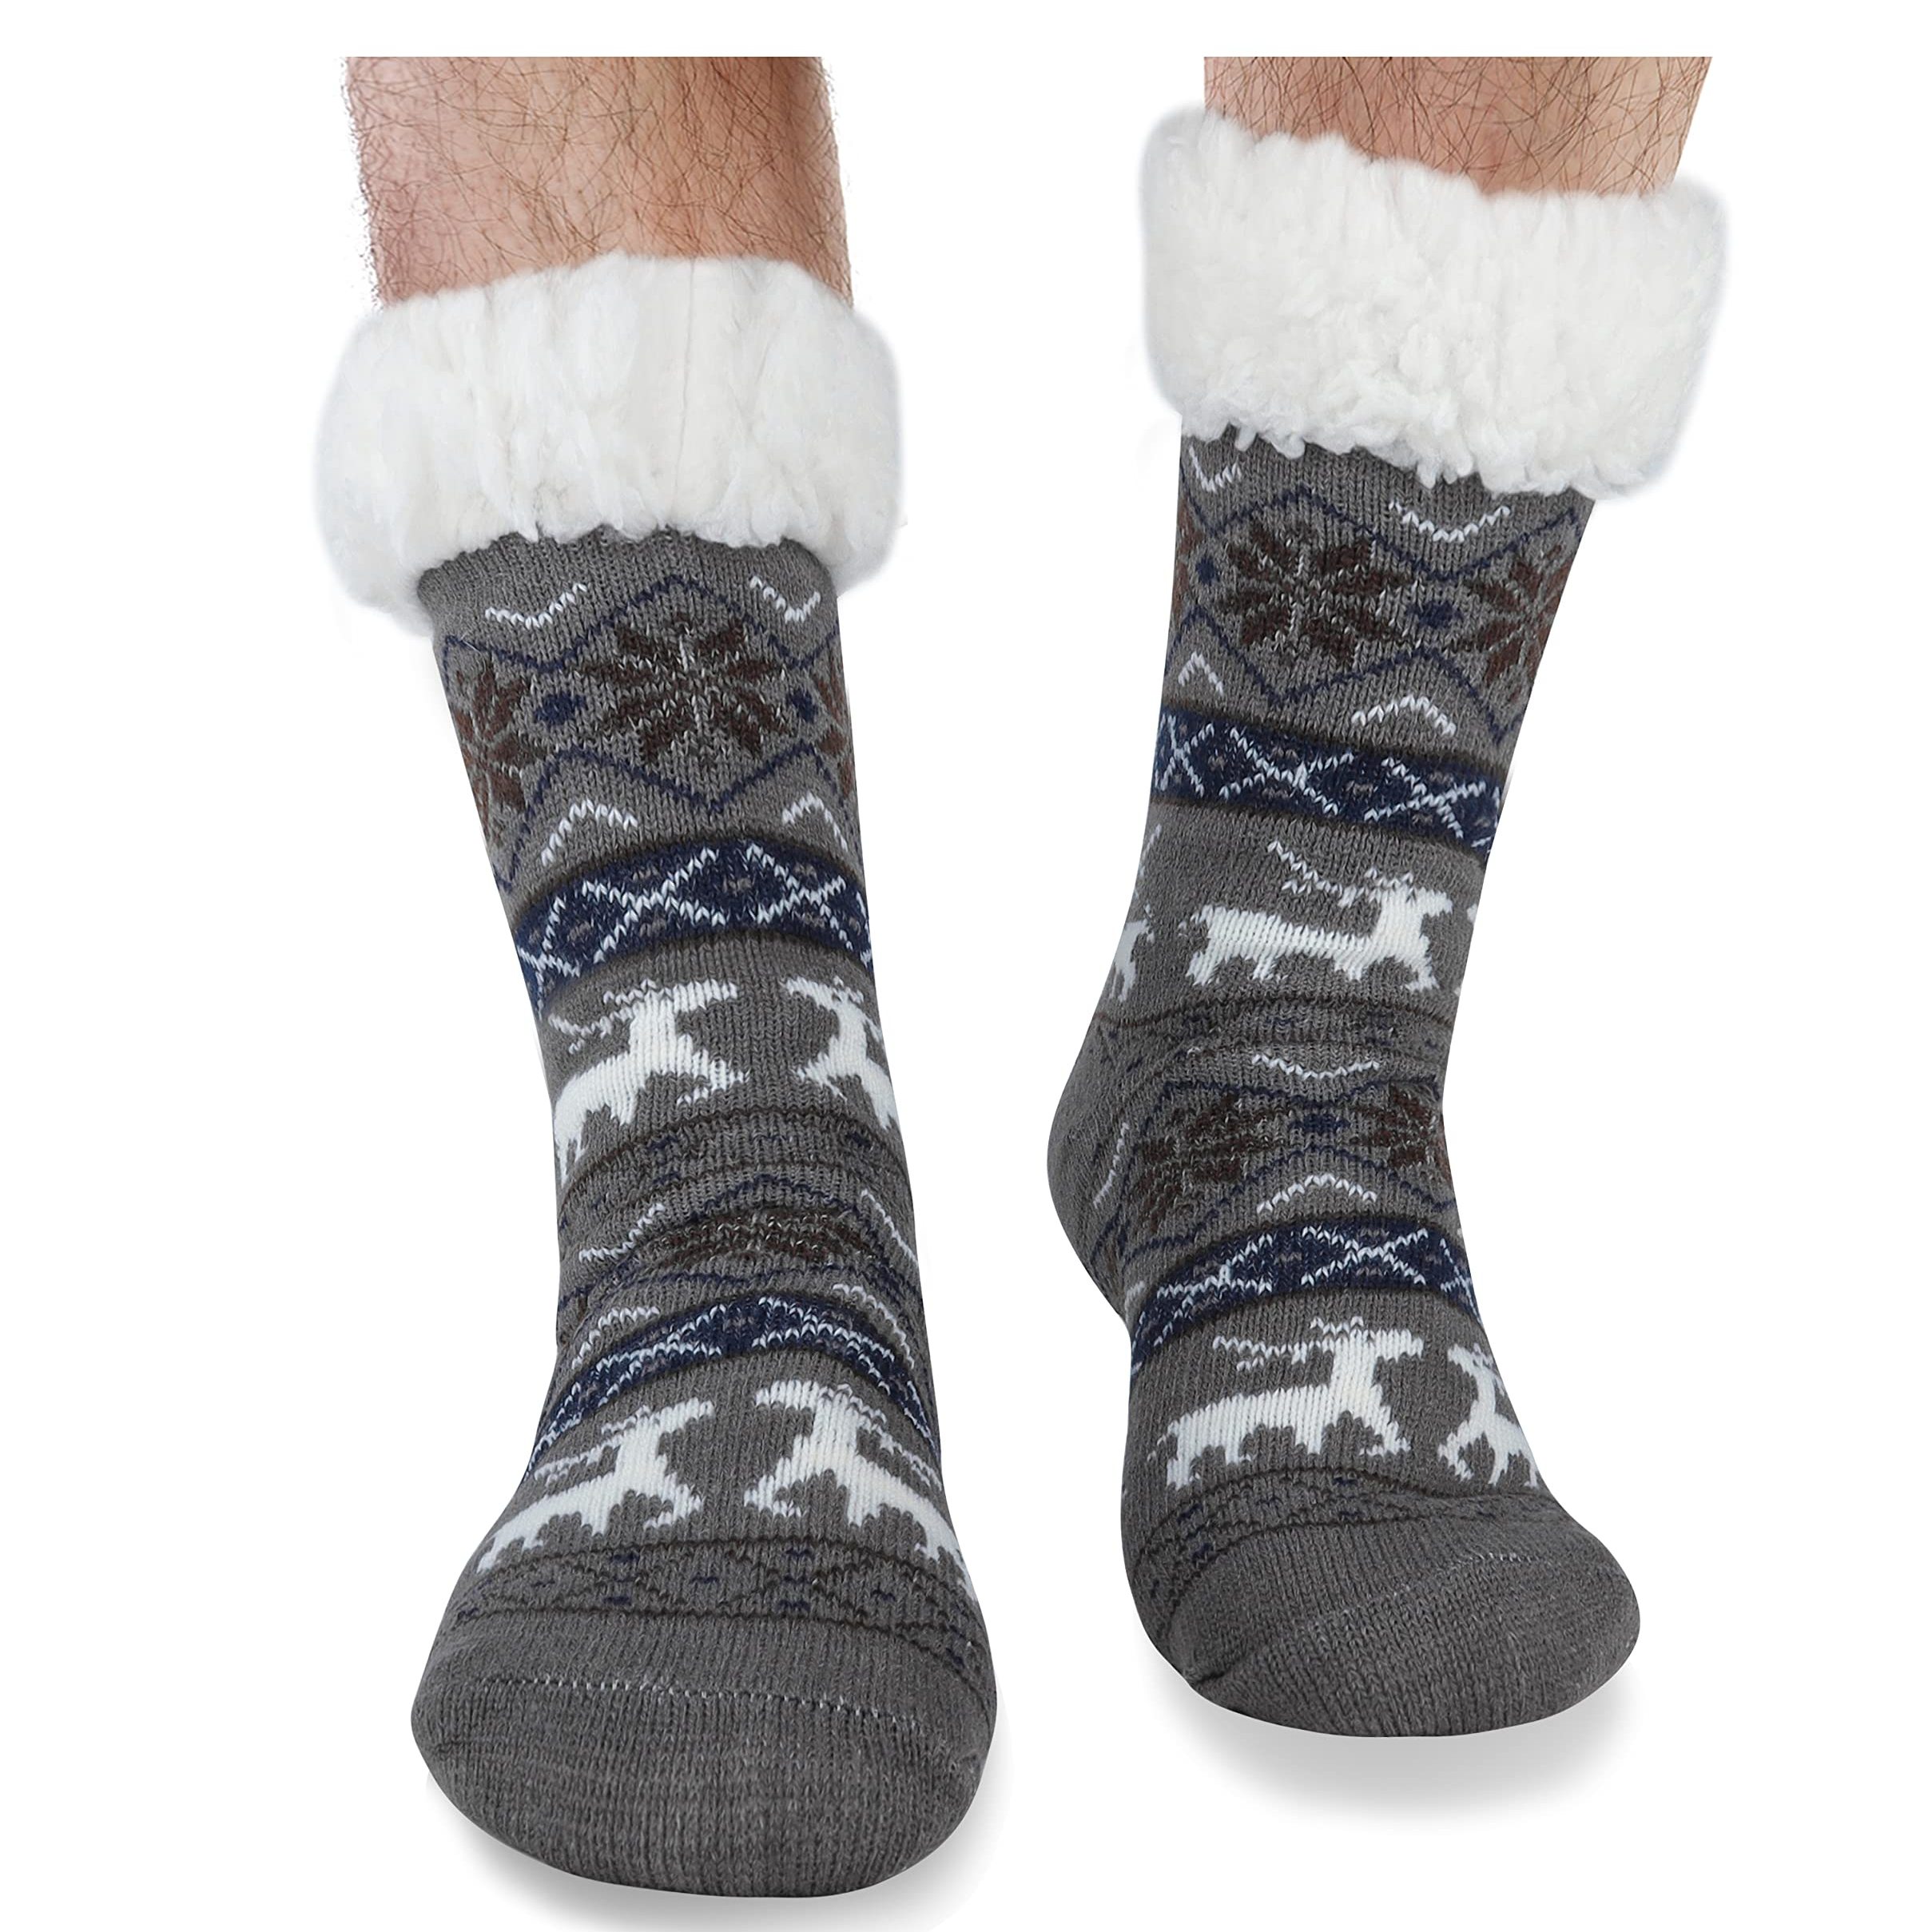 Men's Sherpa lined Slipper Socks with grippers